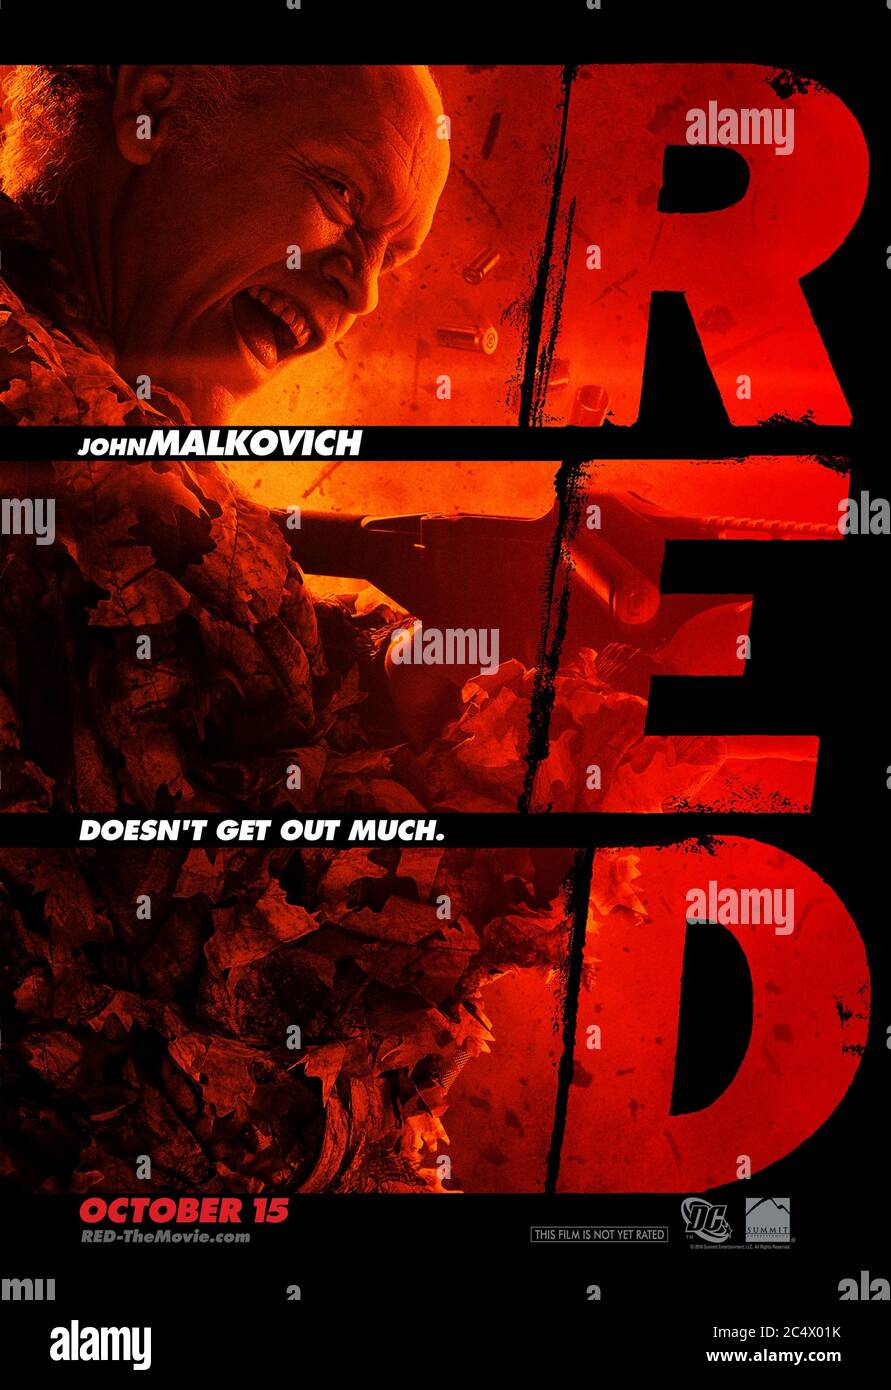 RED (2010) directed by Robert Schwentke and starring John Malkovich as Marvin Boggs who is 'R.E.D.' - Retired Extremely Dangerous, based on the DC Comic book. Stock Photo